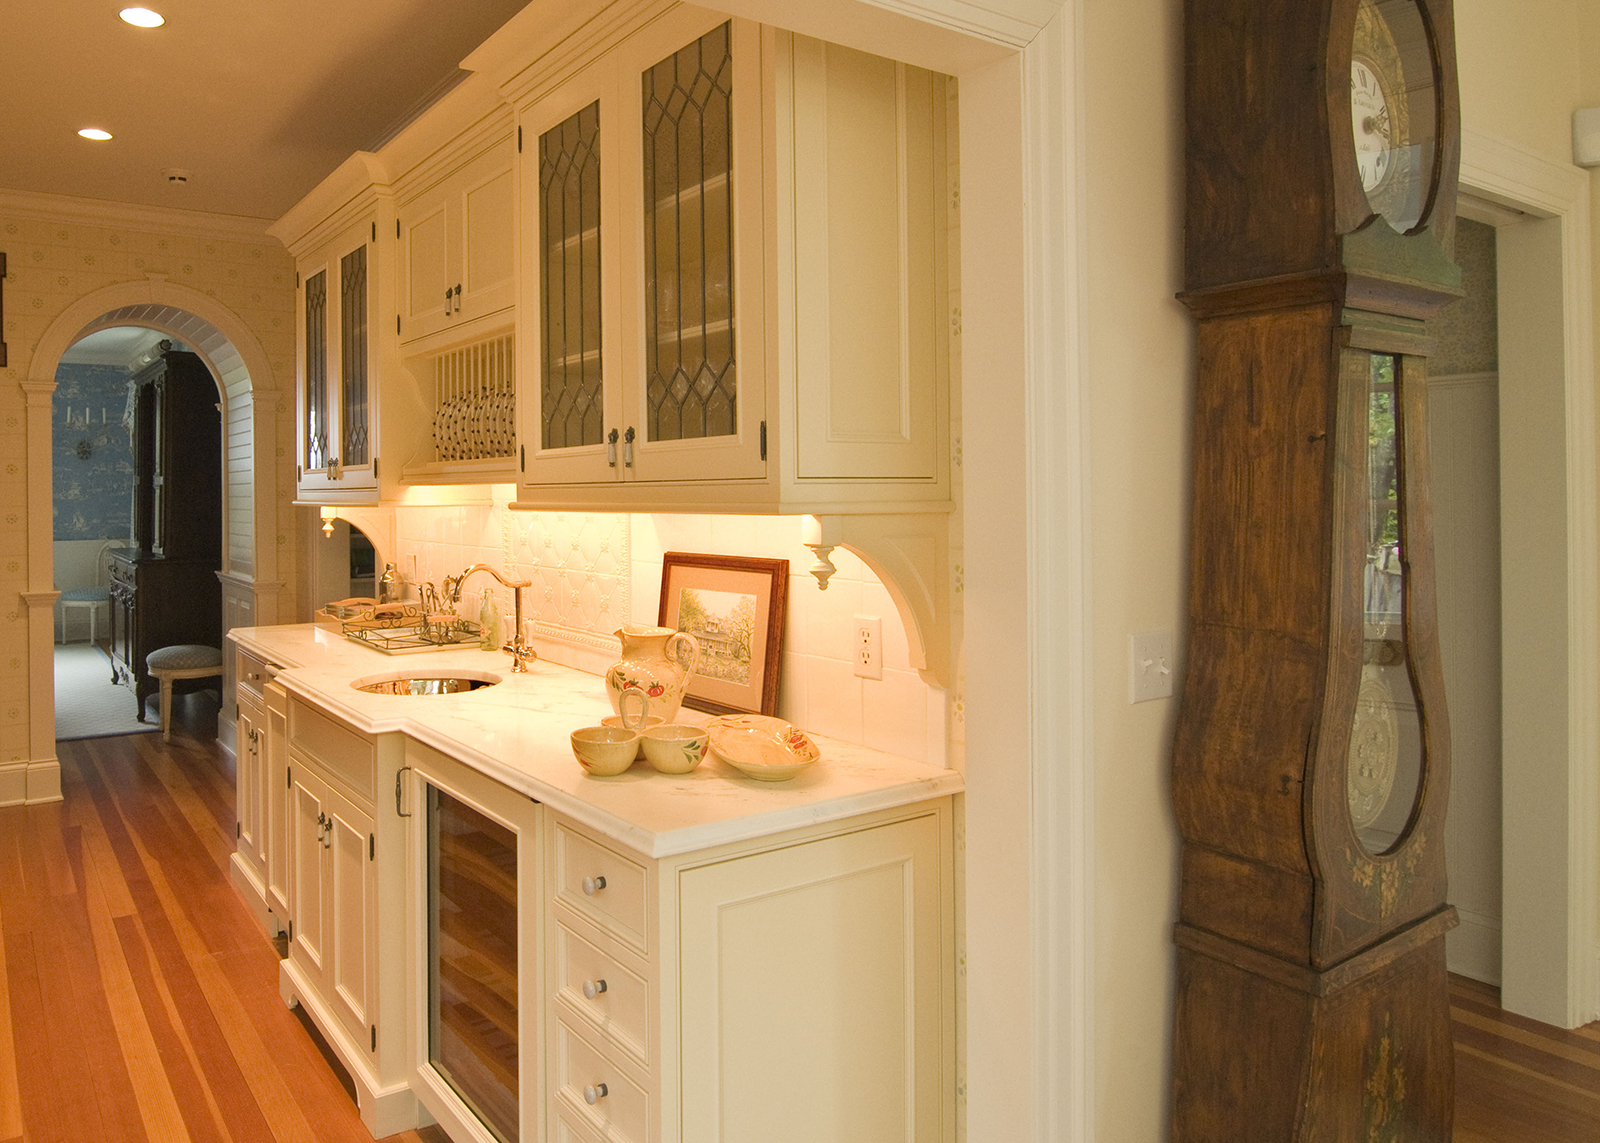 Gary M. Vacca Building Contractor Restoration Custom Cabinetry Millwork